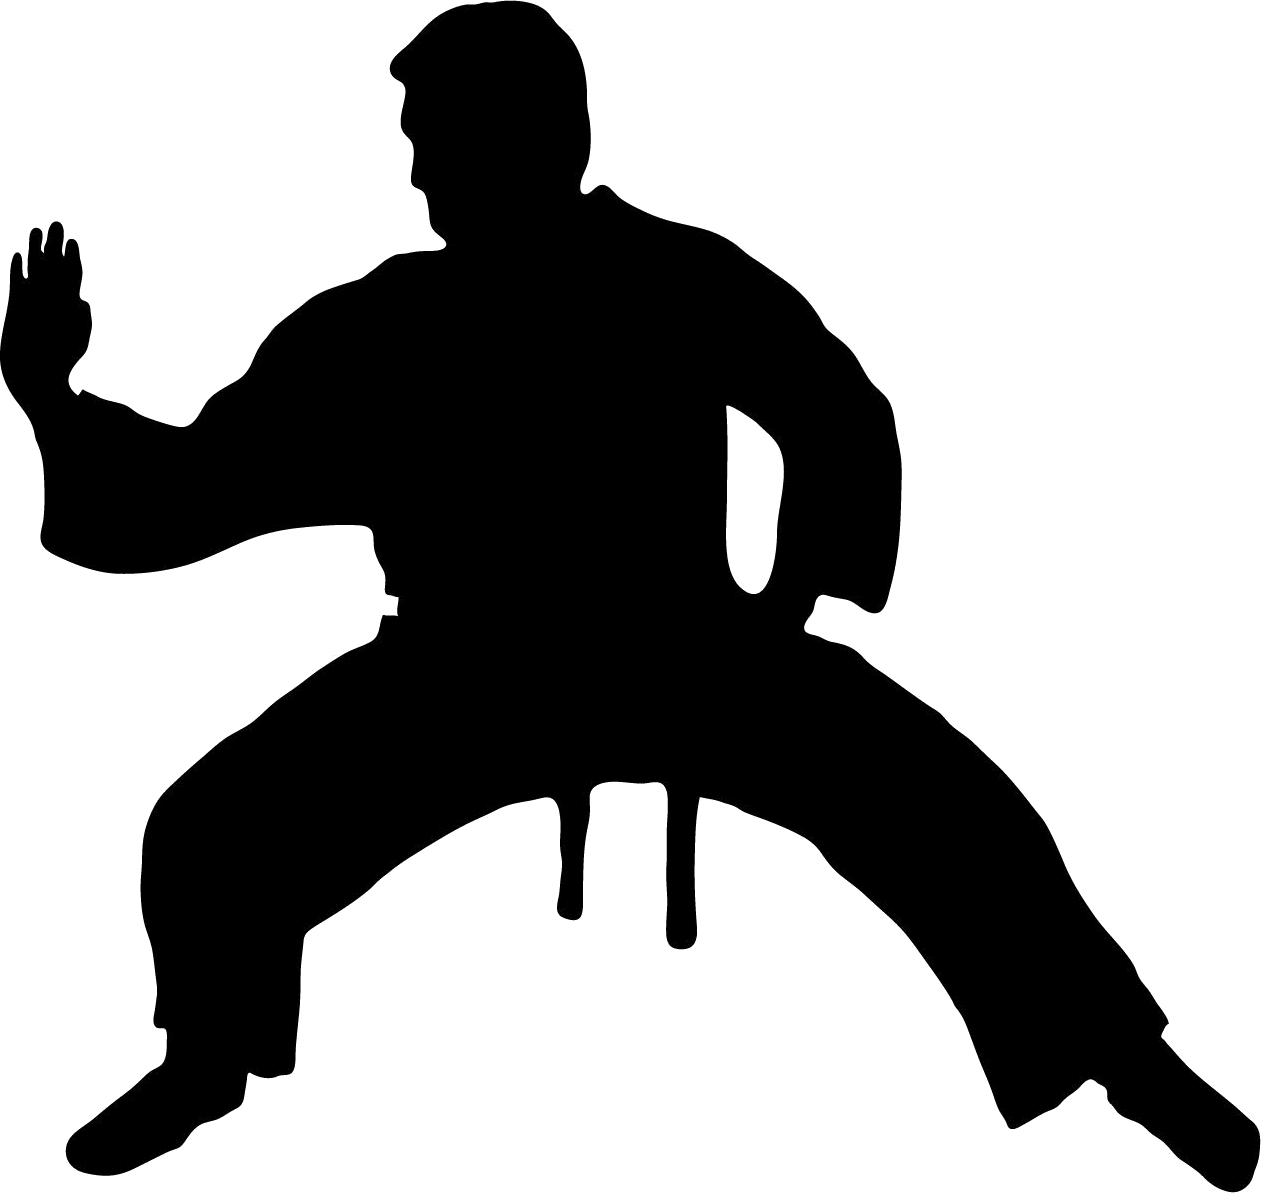 Karate Silhouette Background PNG Image